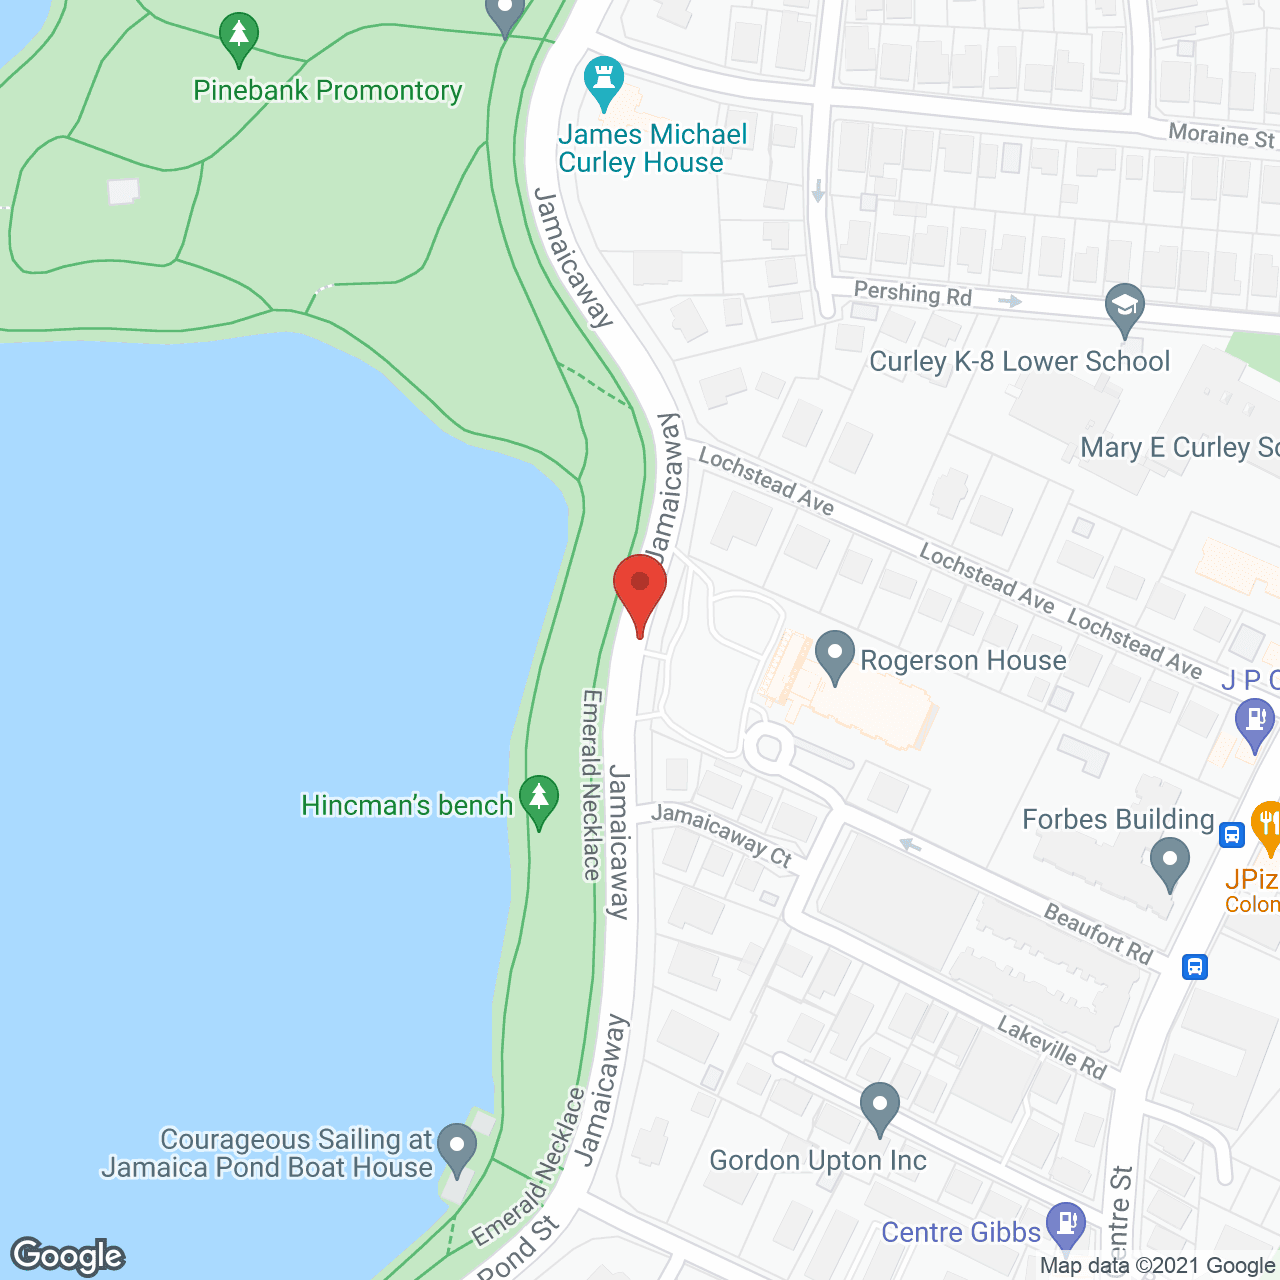 Rogerson House in google map